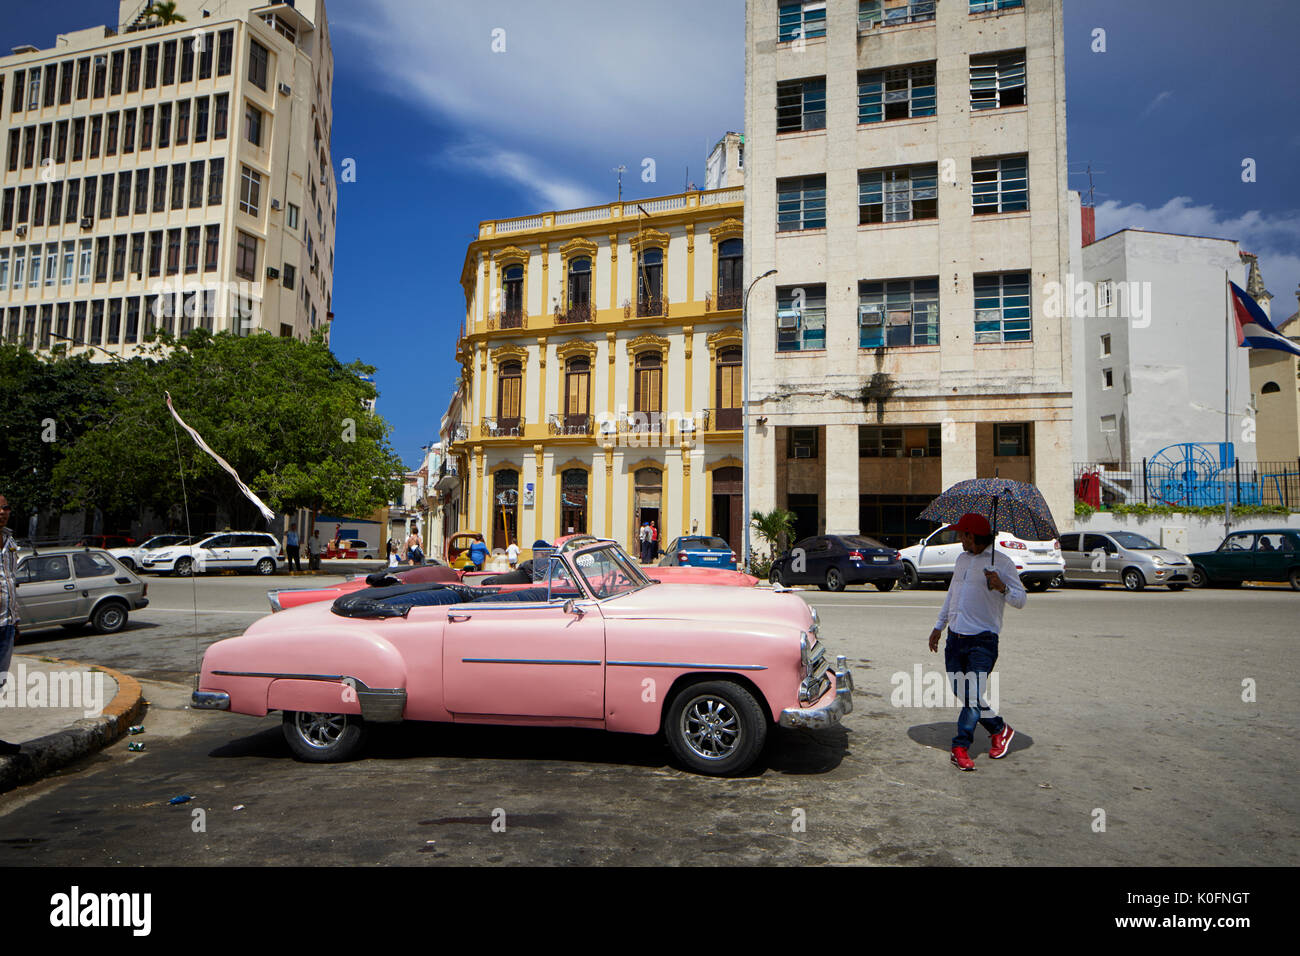 Cuban, Cuba, Capital, Havana Classic old American rerto taxi cars parked one being fixed with its boot up Stock Photo